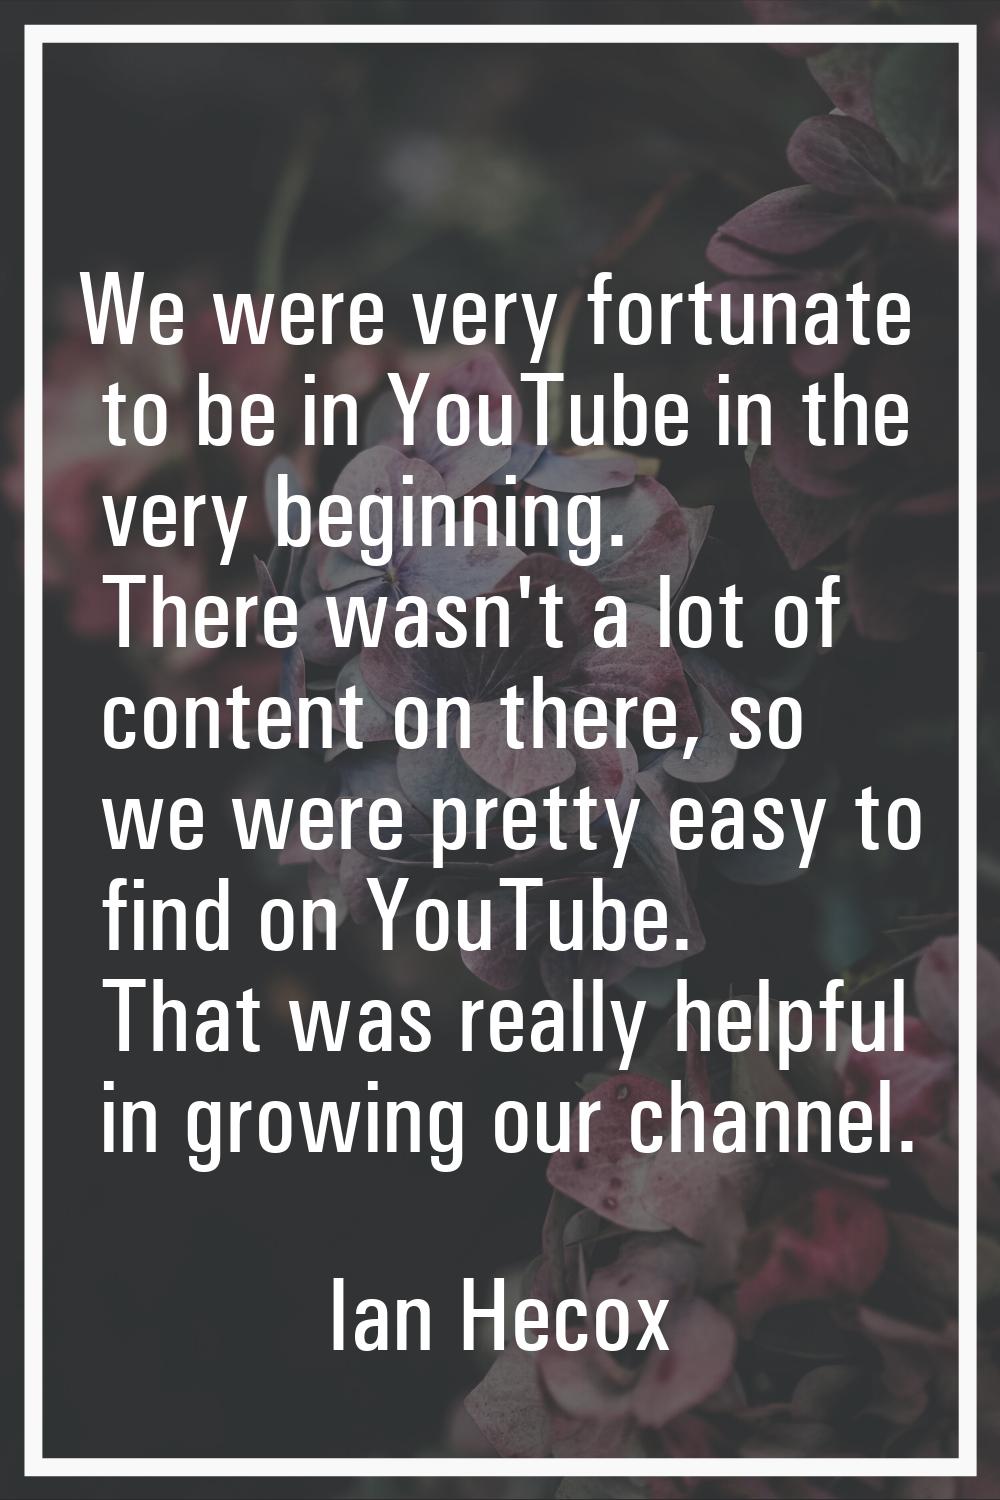 We were very fortunate to be in YouTube in the very beginning. There wasn't a lot of content on the